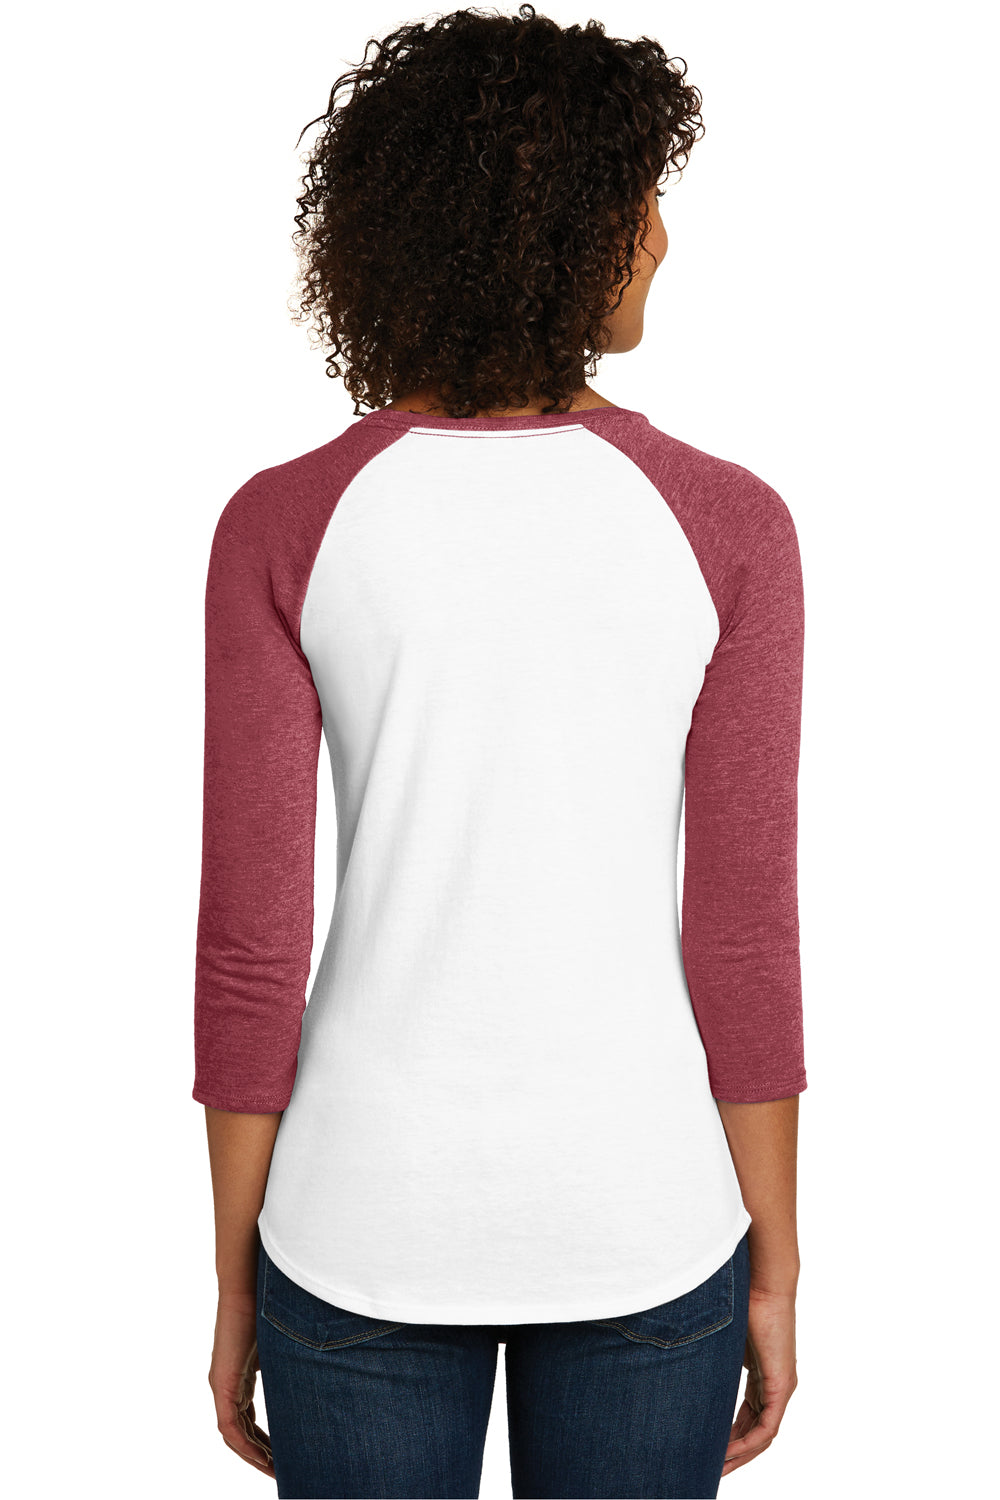 District DT6211 Womens Very Important 3/4 Sleeve Crewneck T-Shirt White/Heather Red Back